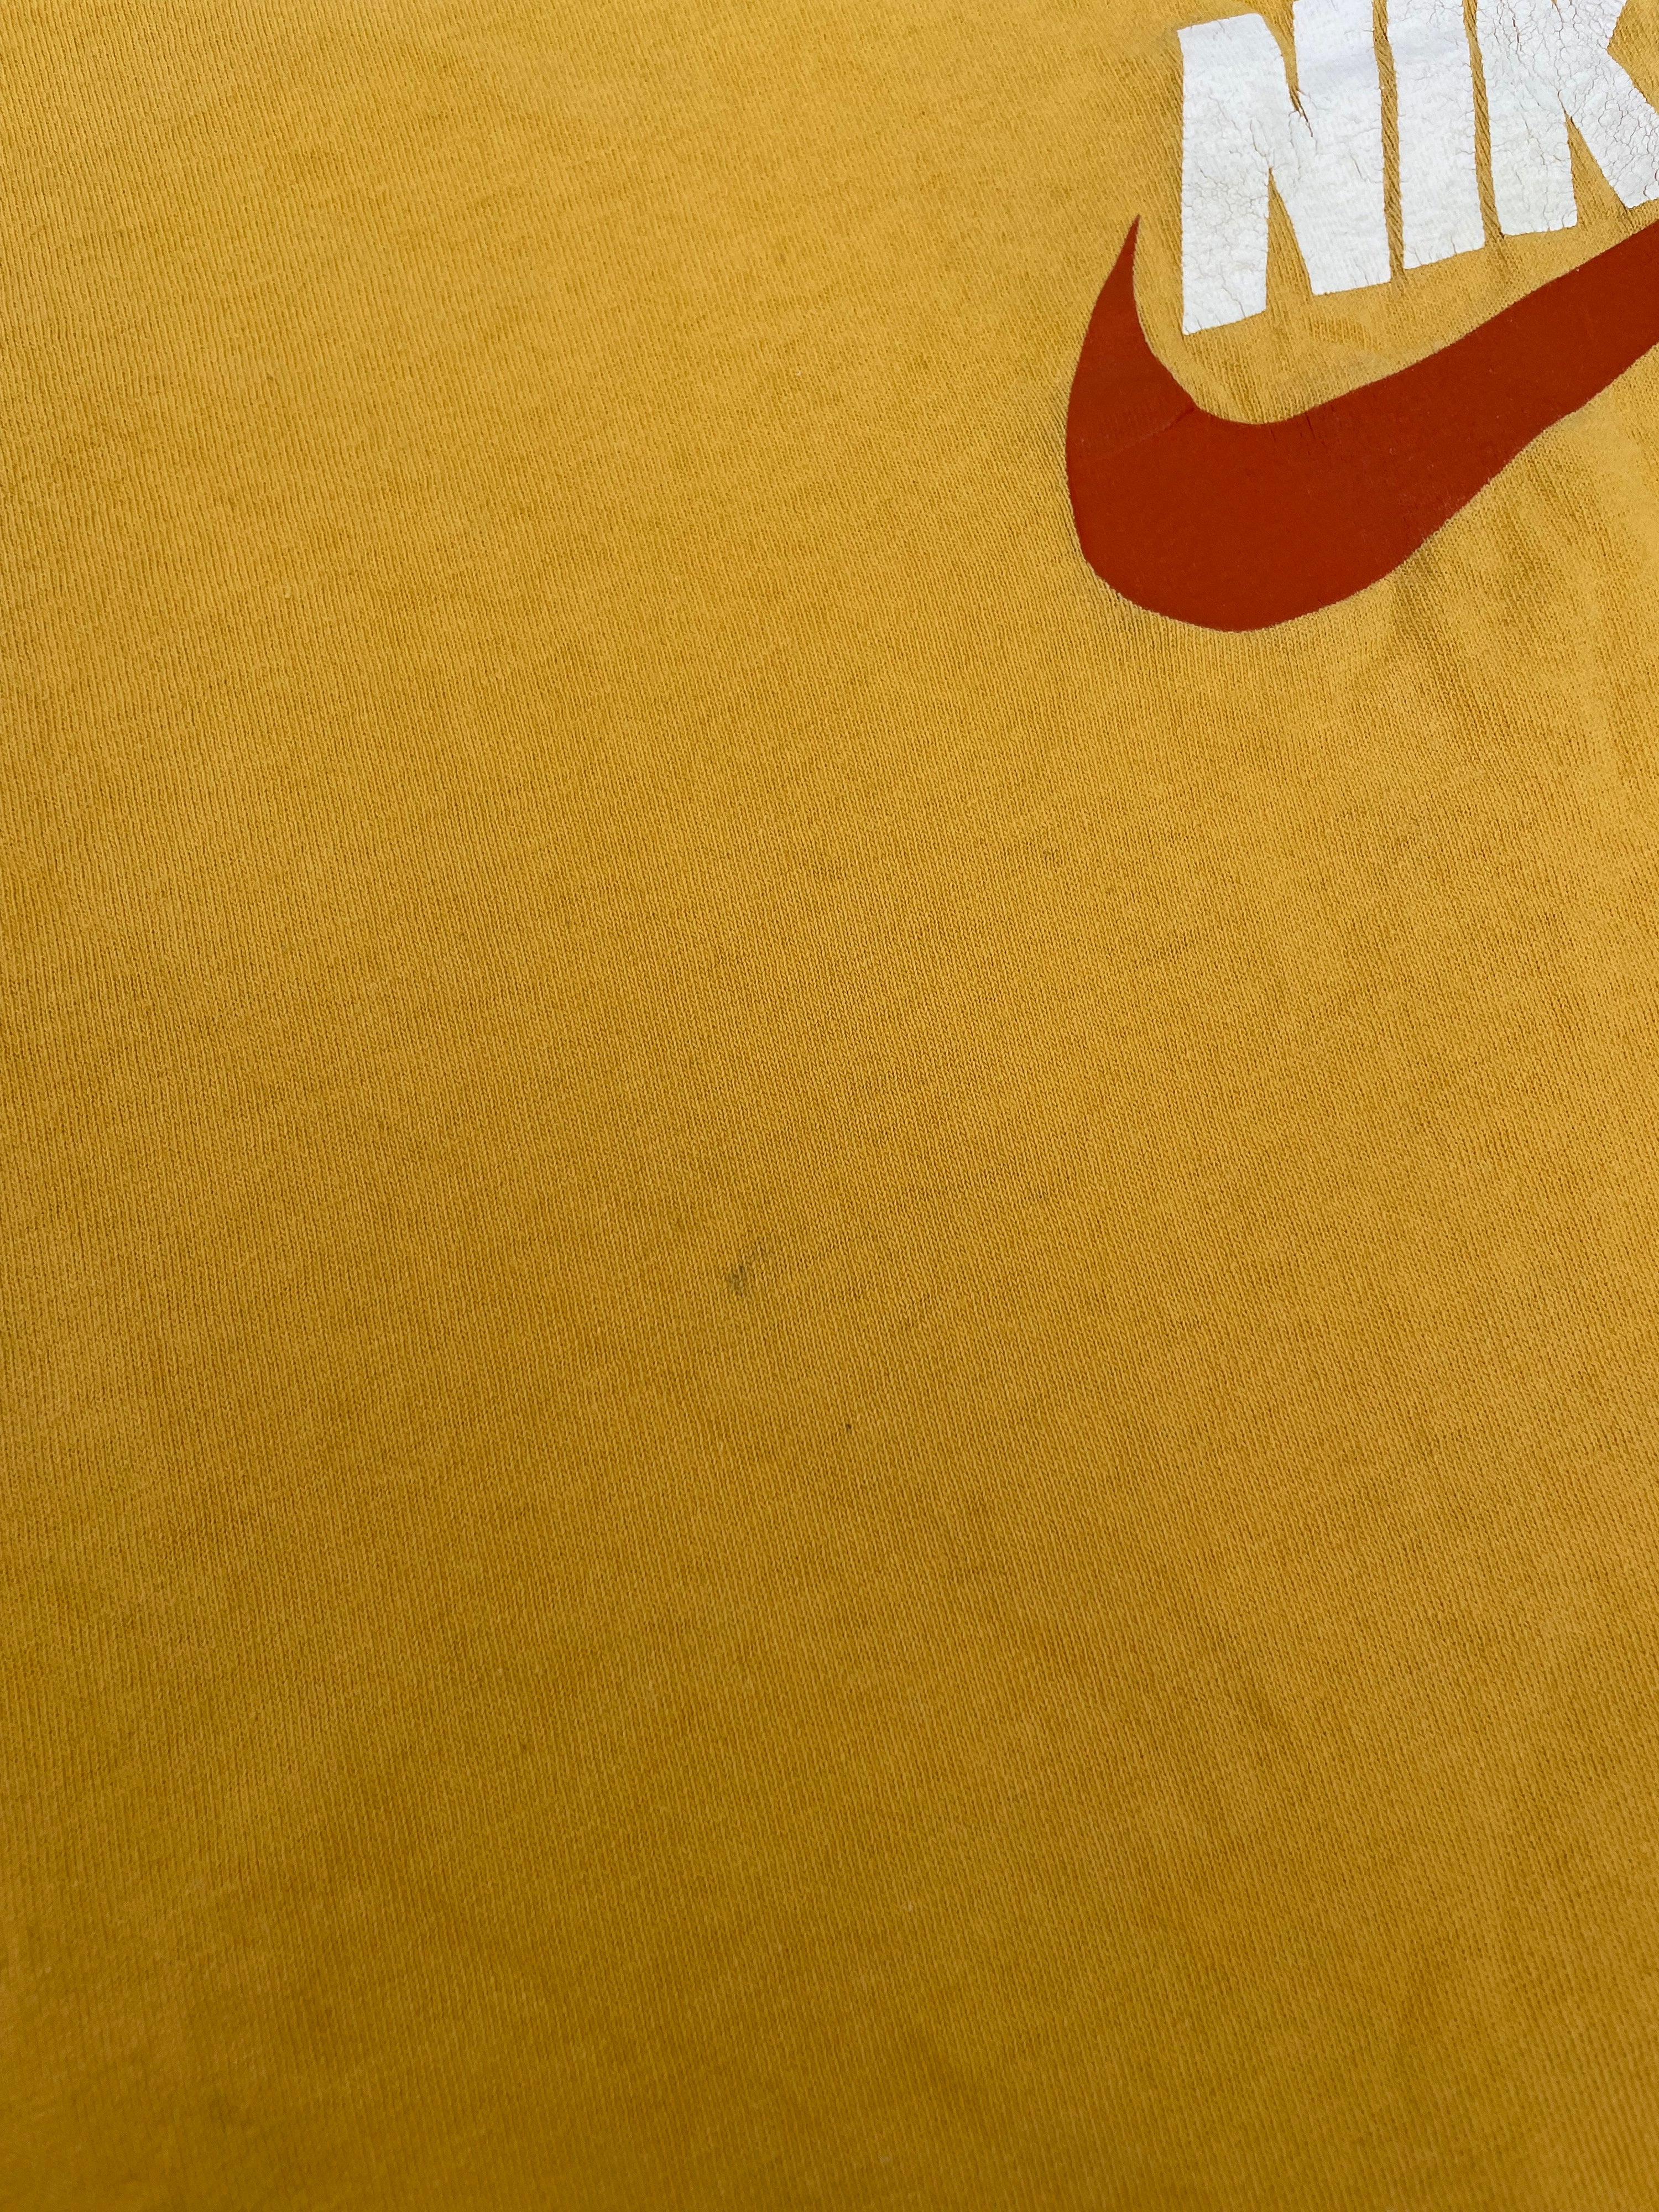 VINTAGE EARLY 2000 OVERSIZE NIKE T-SHIRT YELLOW COLORWAY (L)